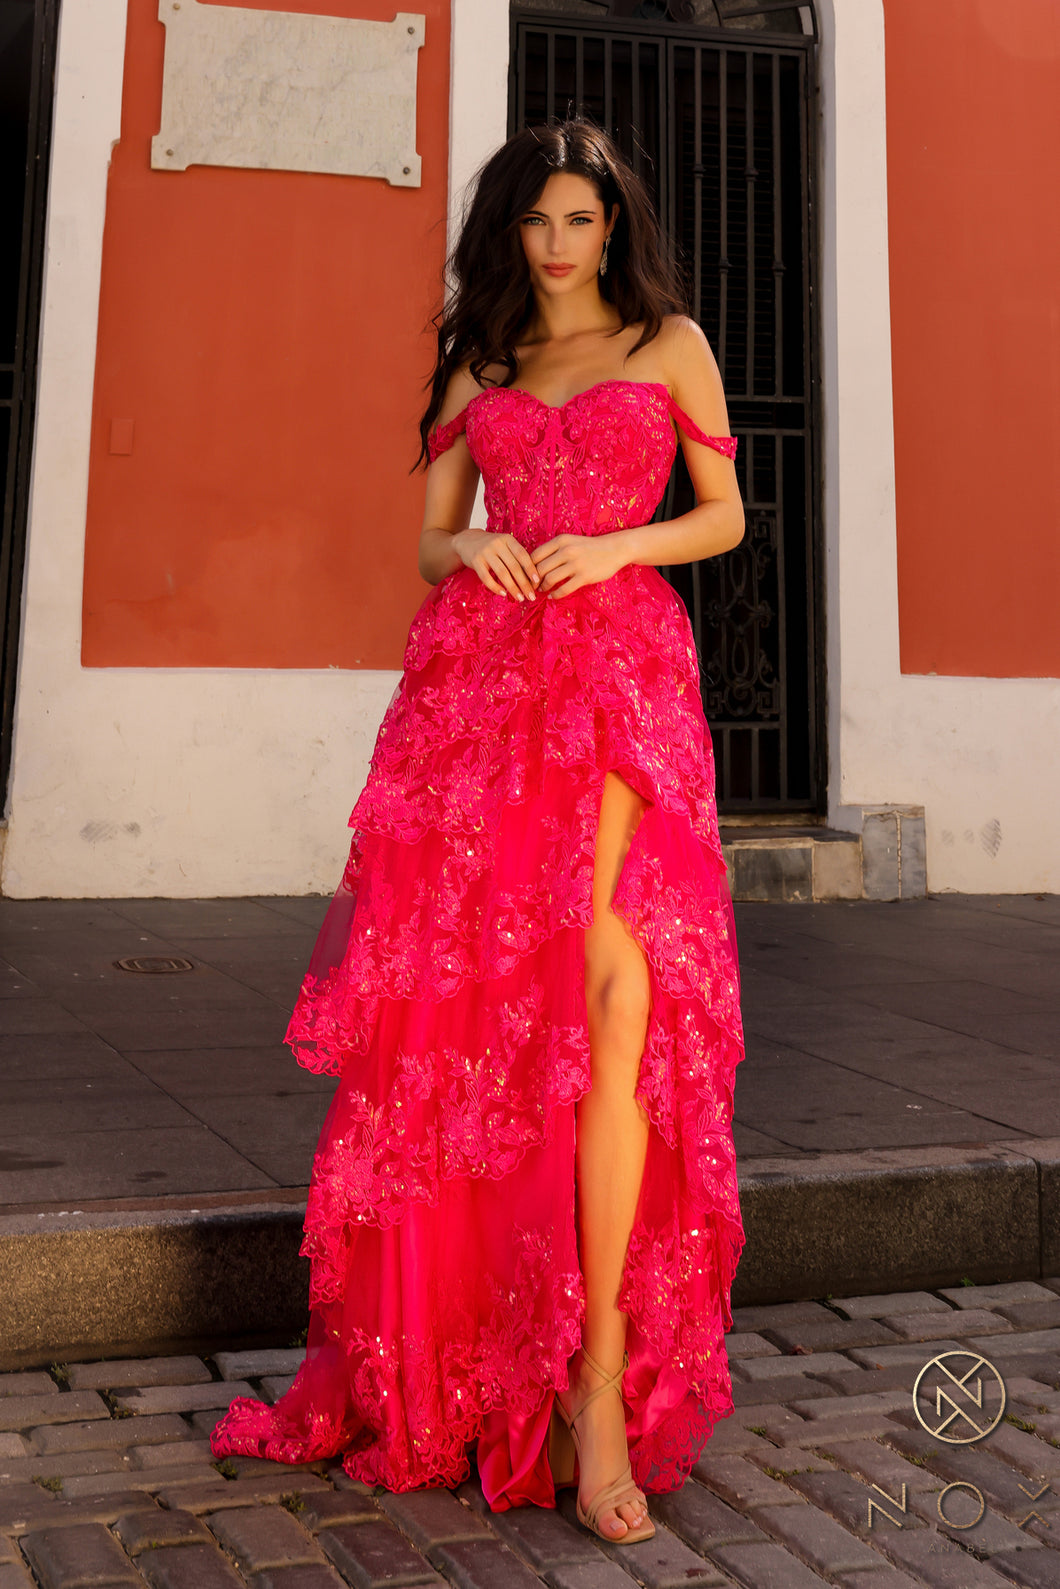 N T1335 - Off the Shoulder A-Line Prom Gown with Sequin Embellished Lace Layered Ruffle Skirt & Leg Slit PROM GOWN Nox 0 FUCHSIA 